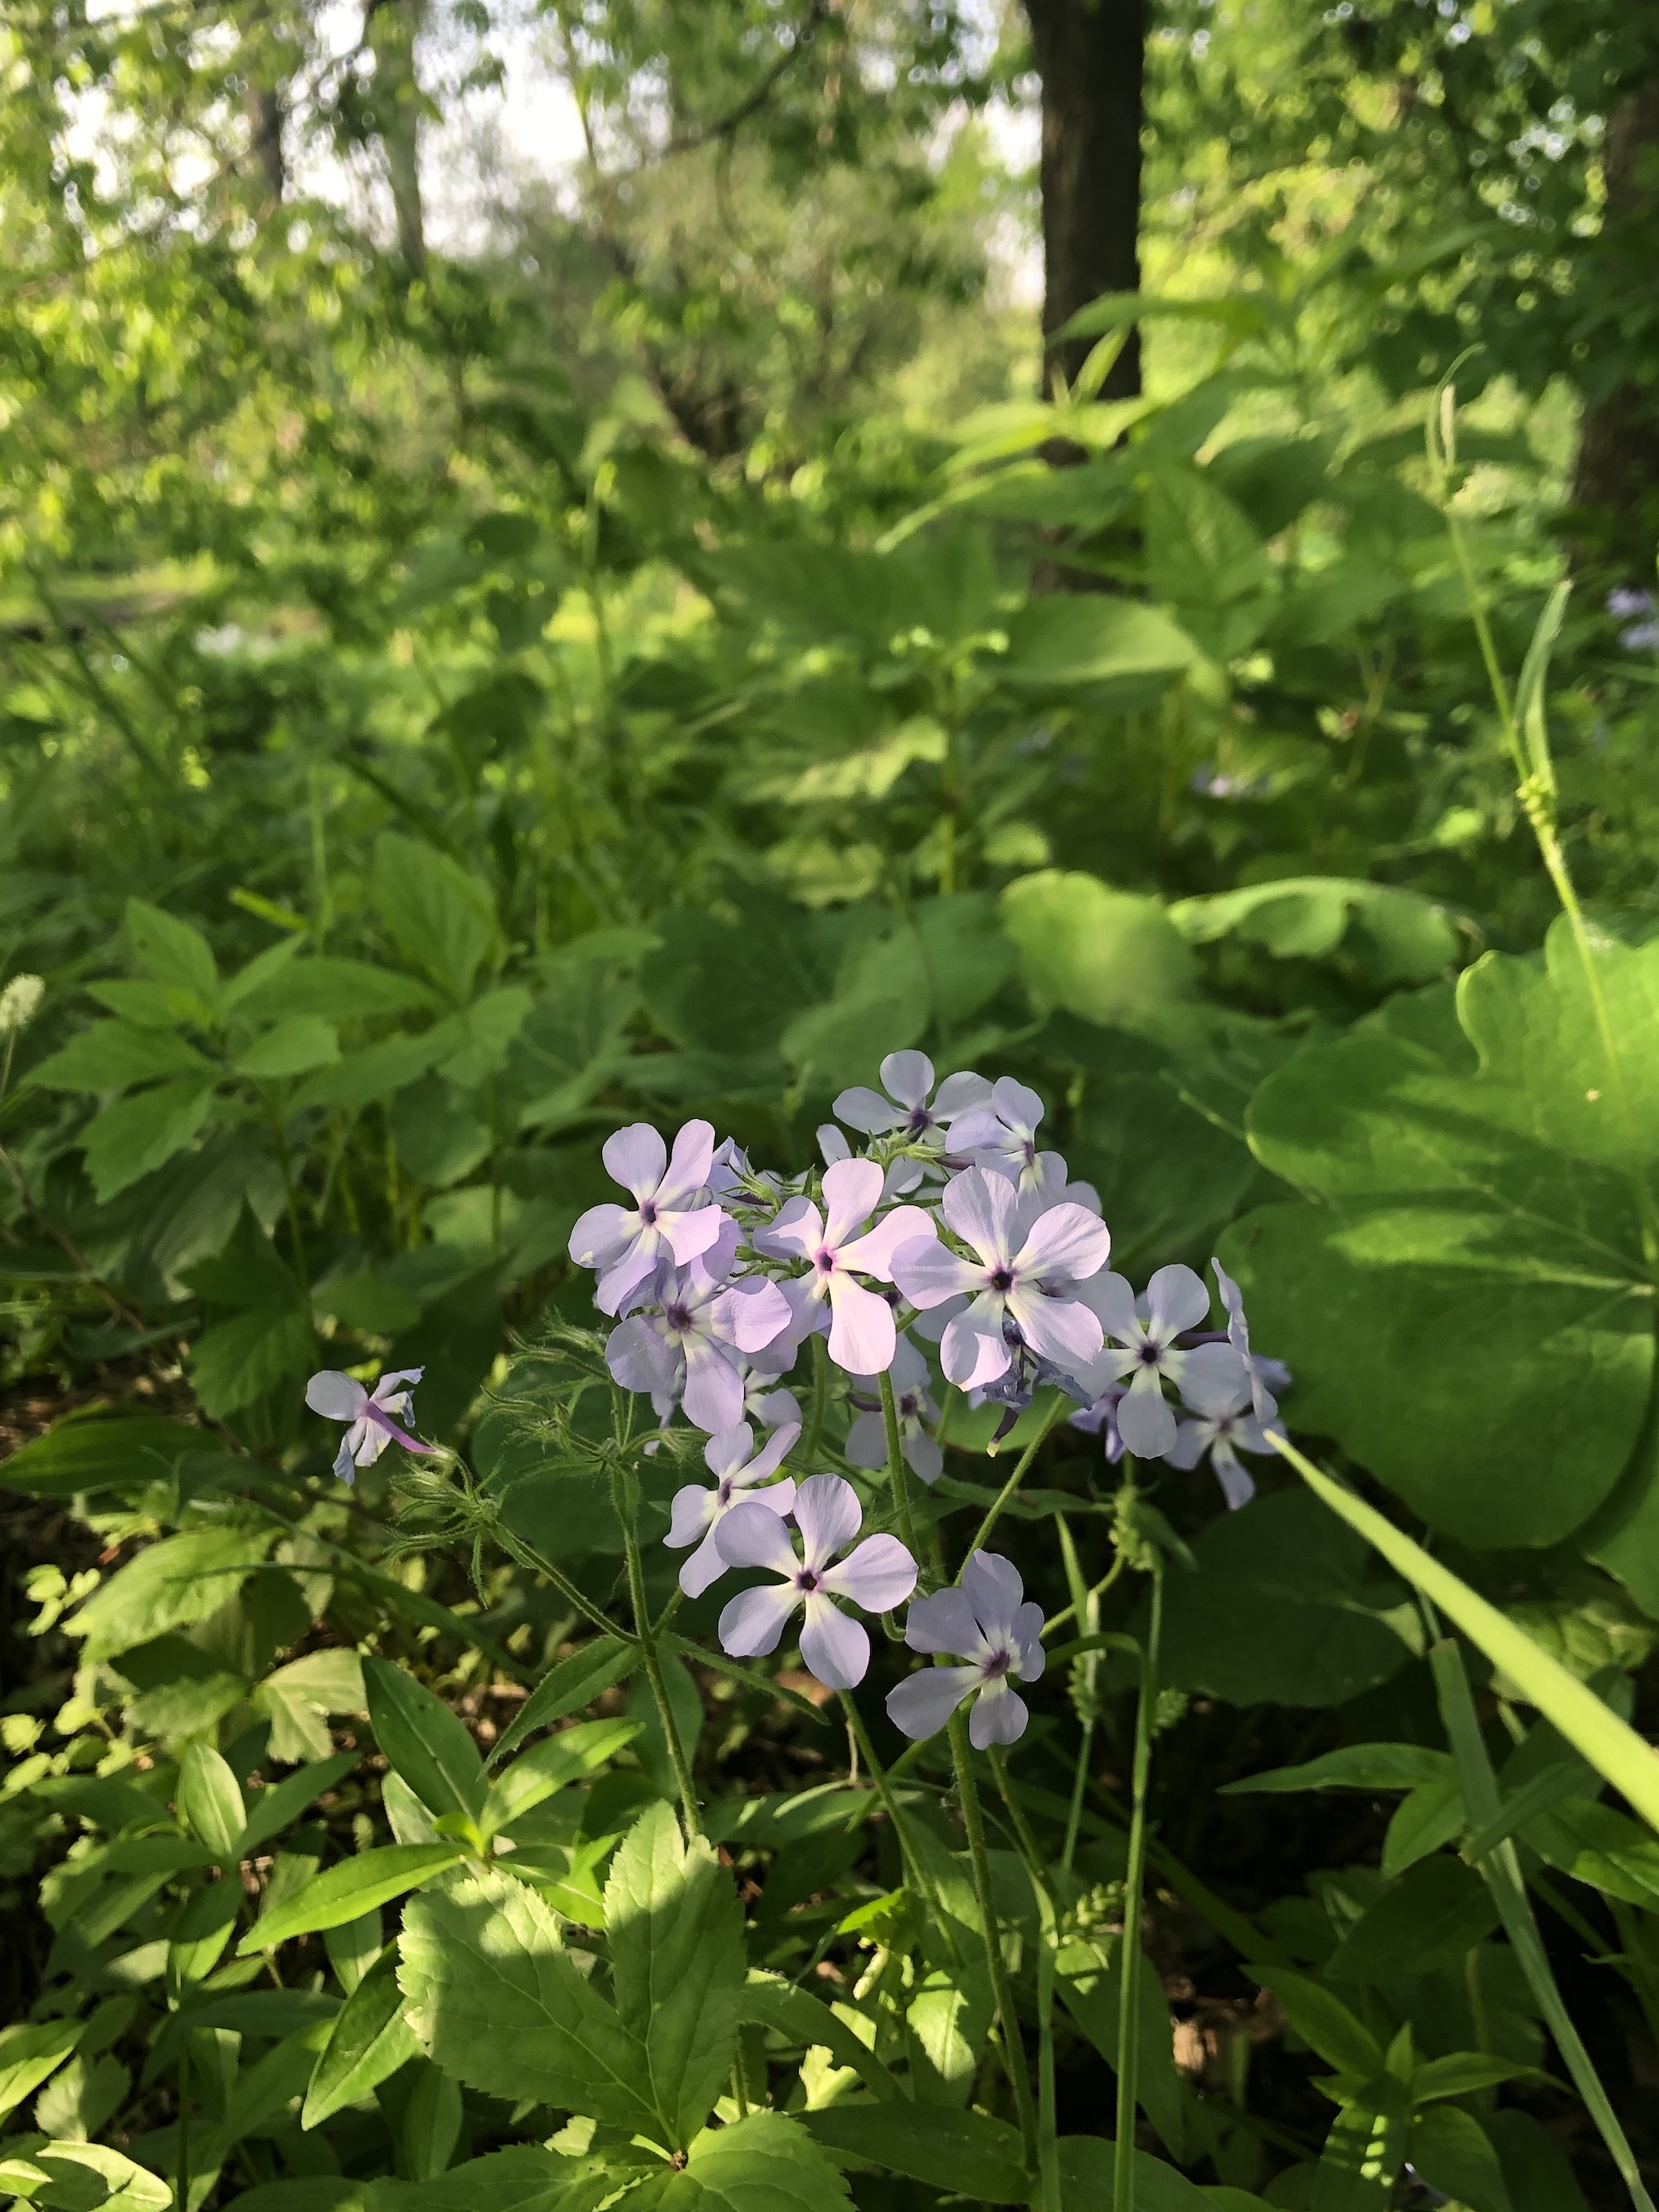 Woodland Phlox by Council Ring in Oak Savanna in Madison, Wisconsin  on May 30, 2022.